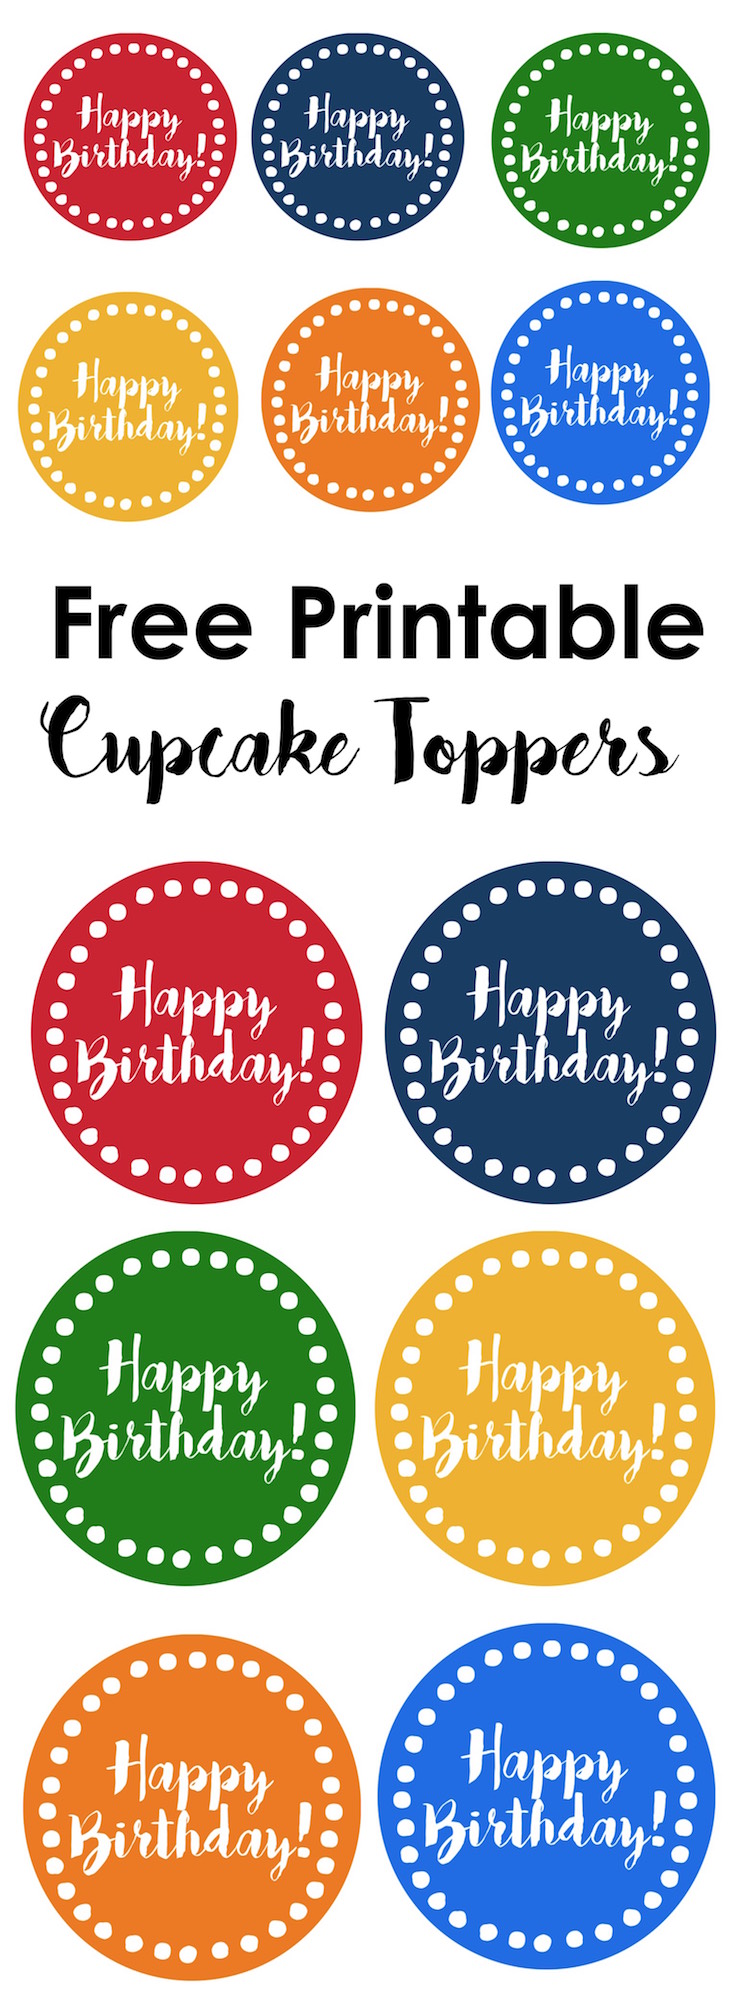 Happy Birthday cupcake toppers free printable. Print these colorful happy birthday cupcake toppers in rainbow colors for a cute birthday party without a theme.